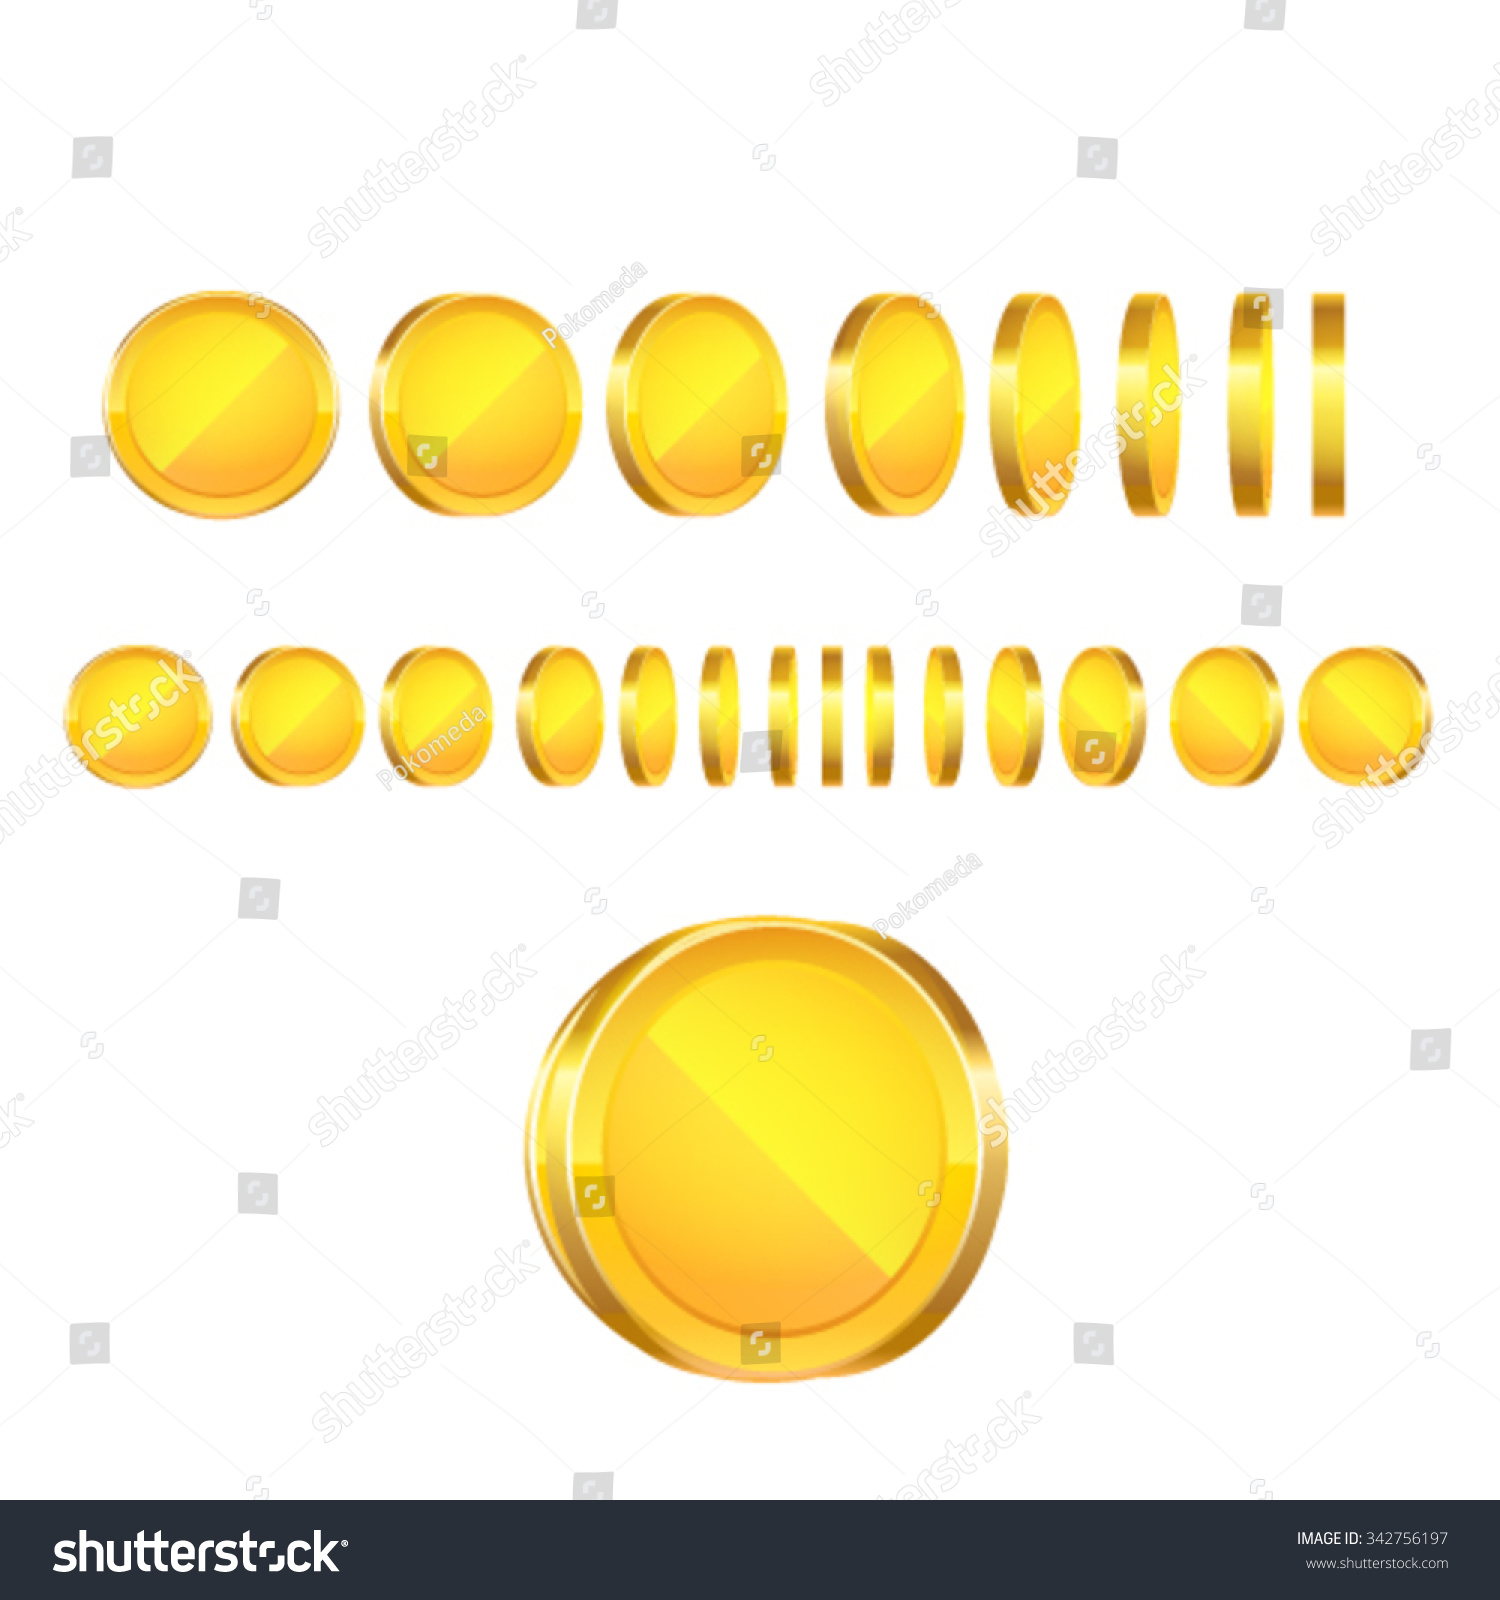 Gold Coins Animation Vector Stock Vector (Royalty Free) 342756197